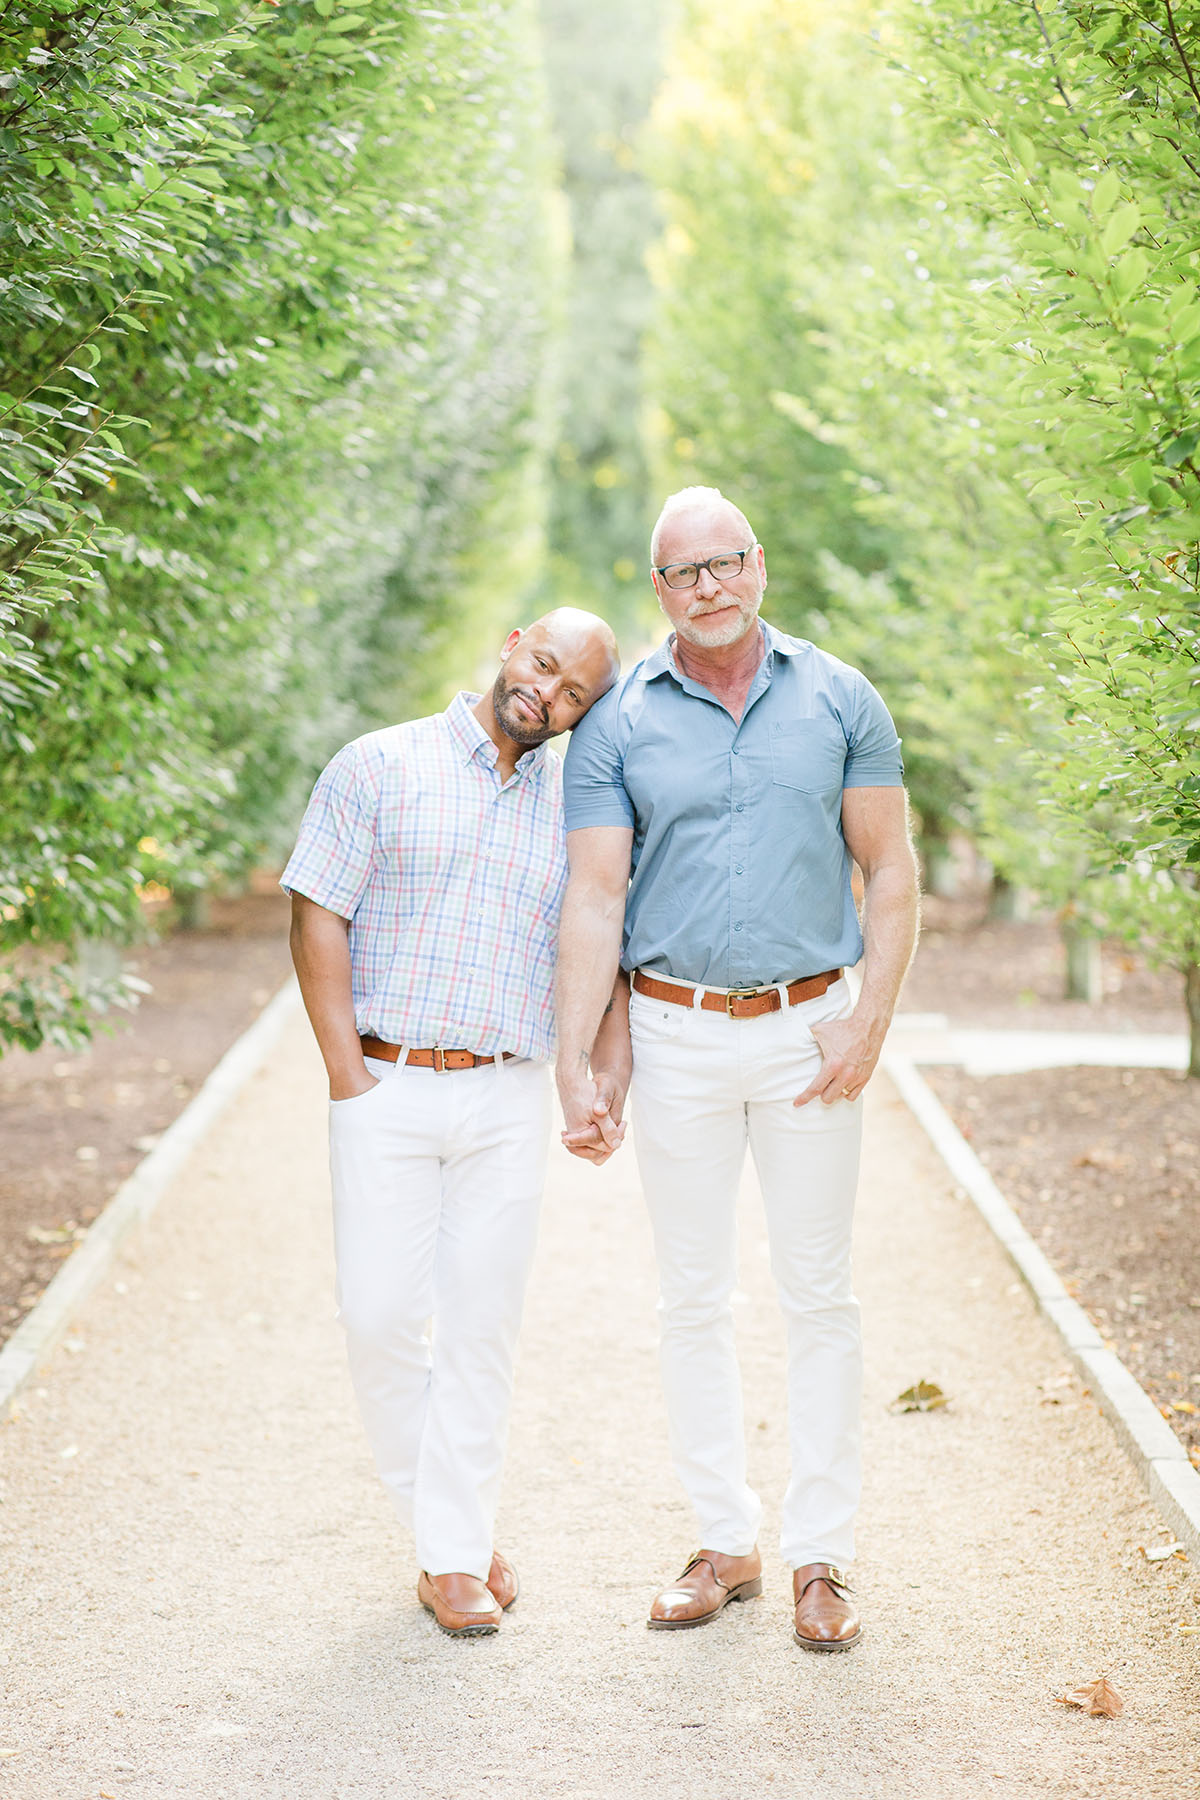 Garden engagement photos at the Franklin Park Conservatory LGBTQ+ weddings two grooms engagement gay outdoors nature holding hands